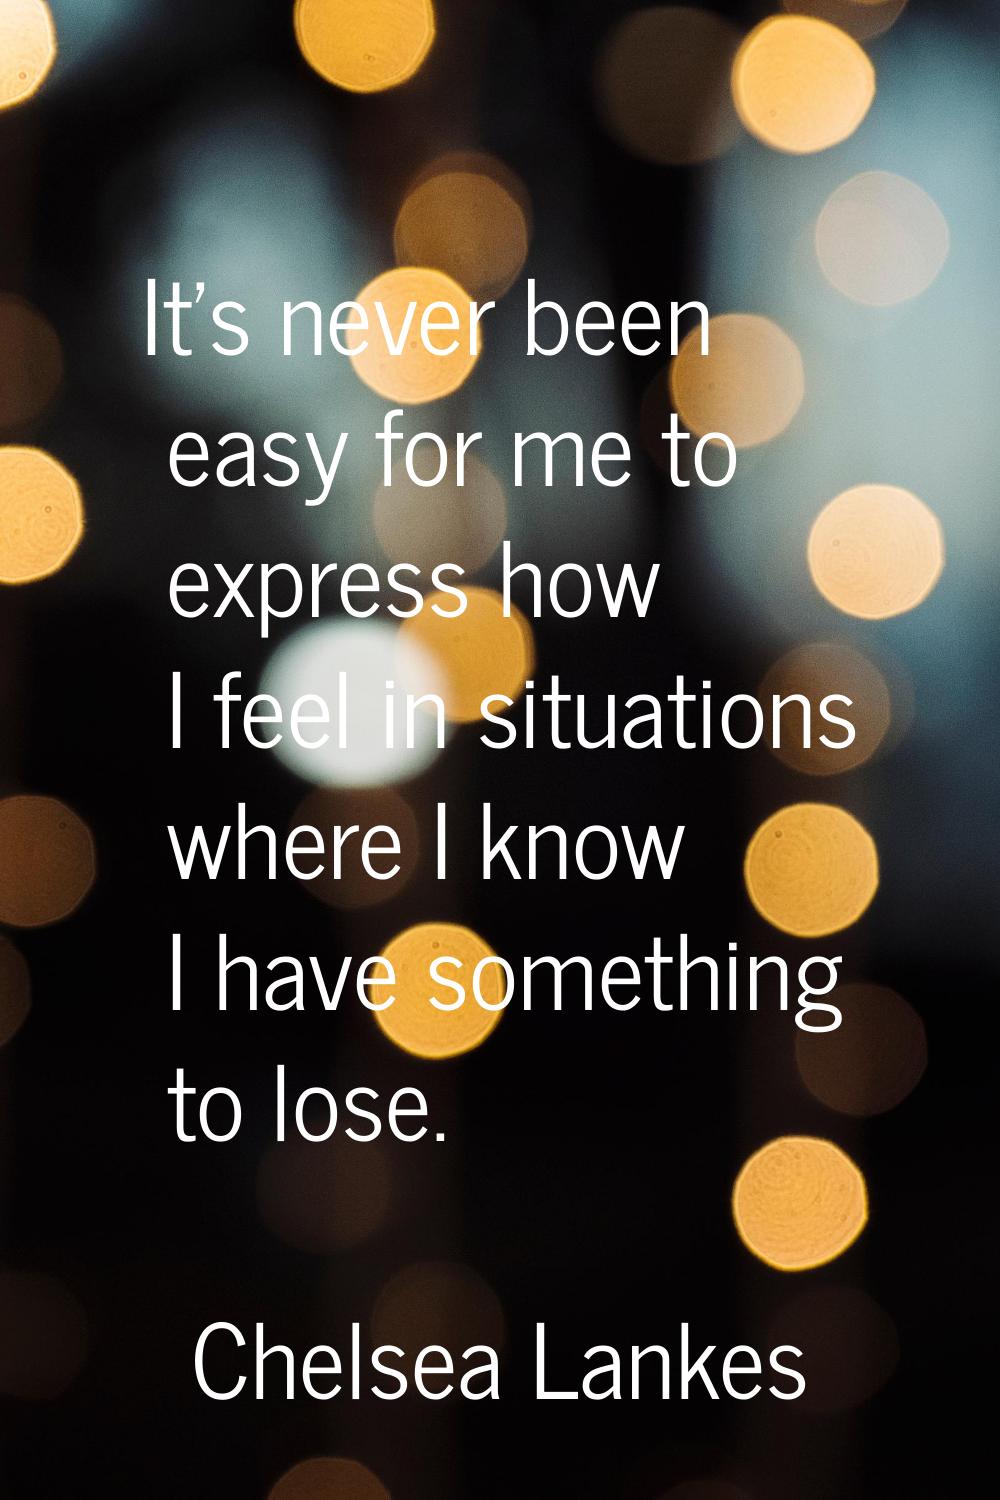 It's never been easy for me to express how I feel in situations where I know I have something to lo